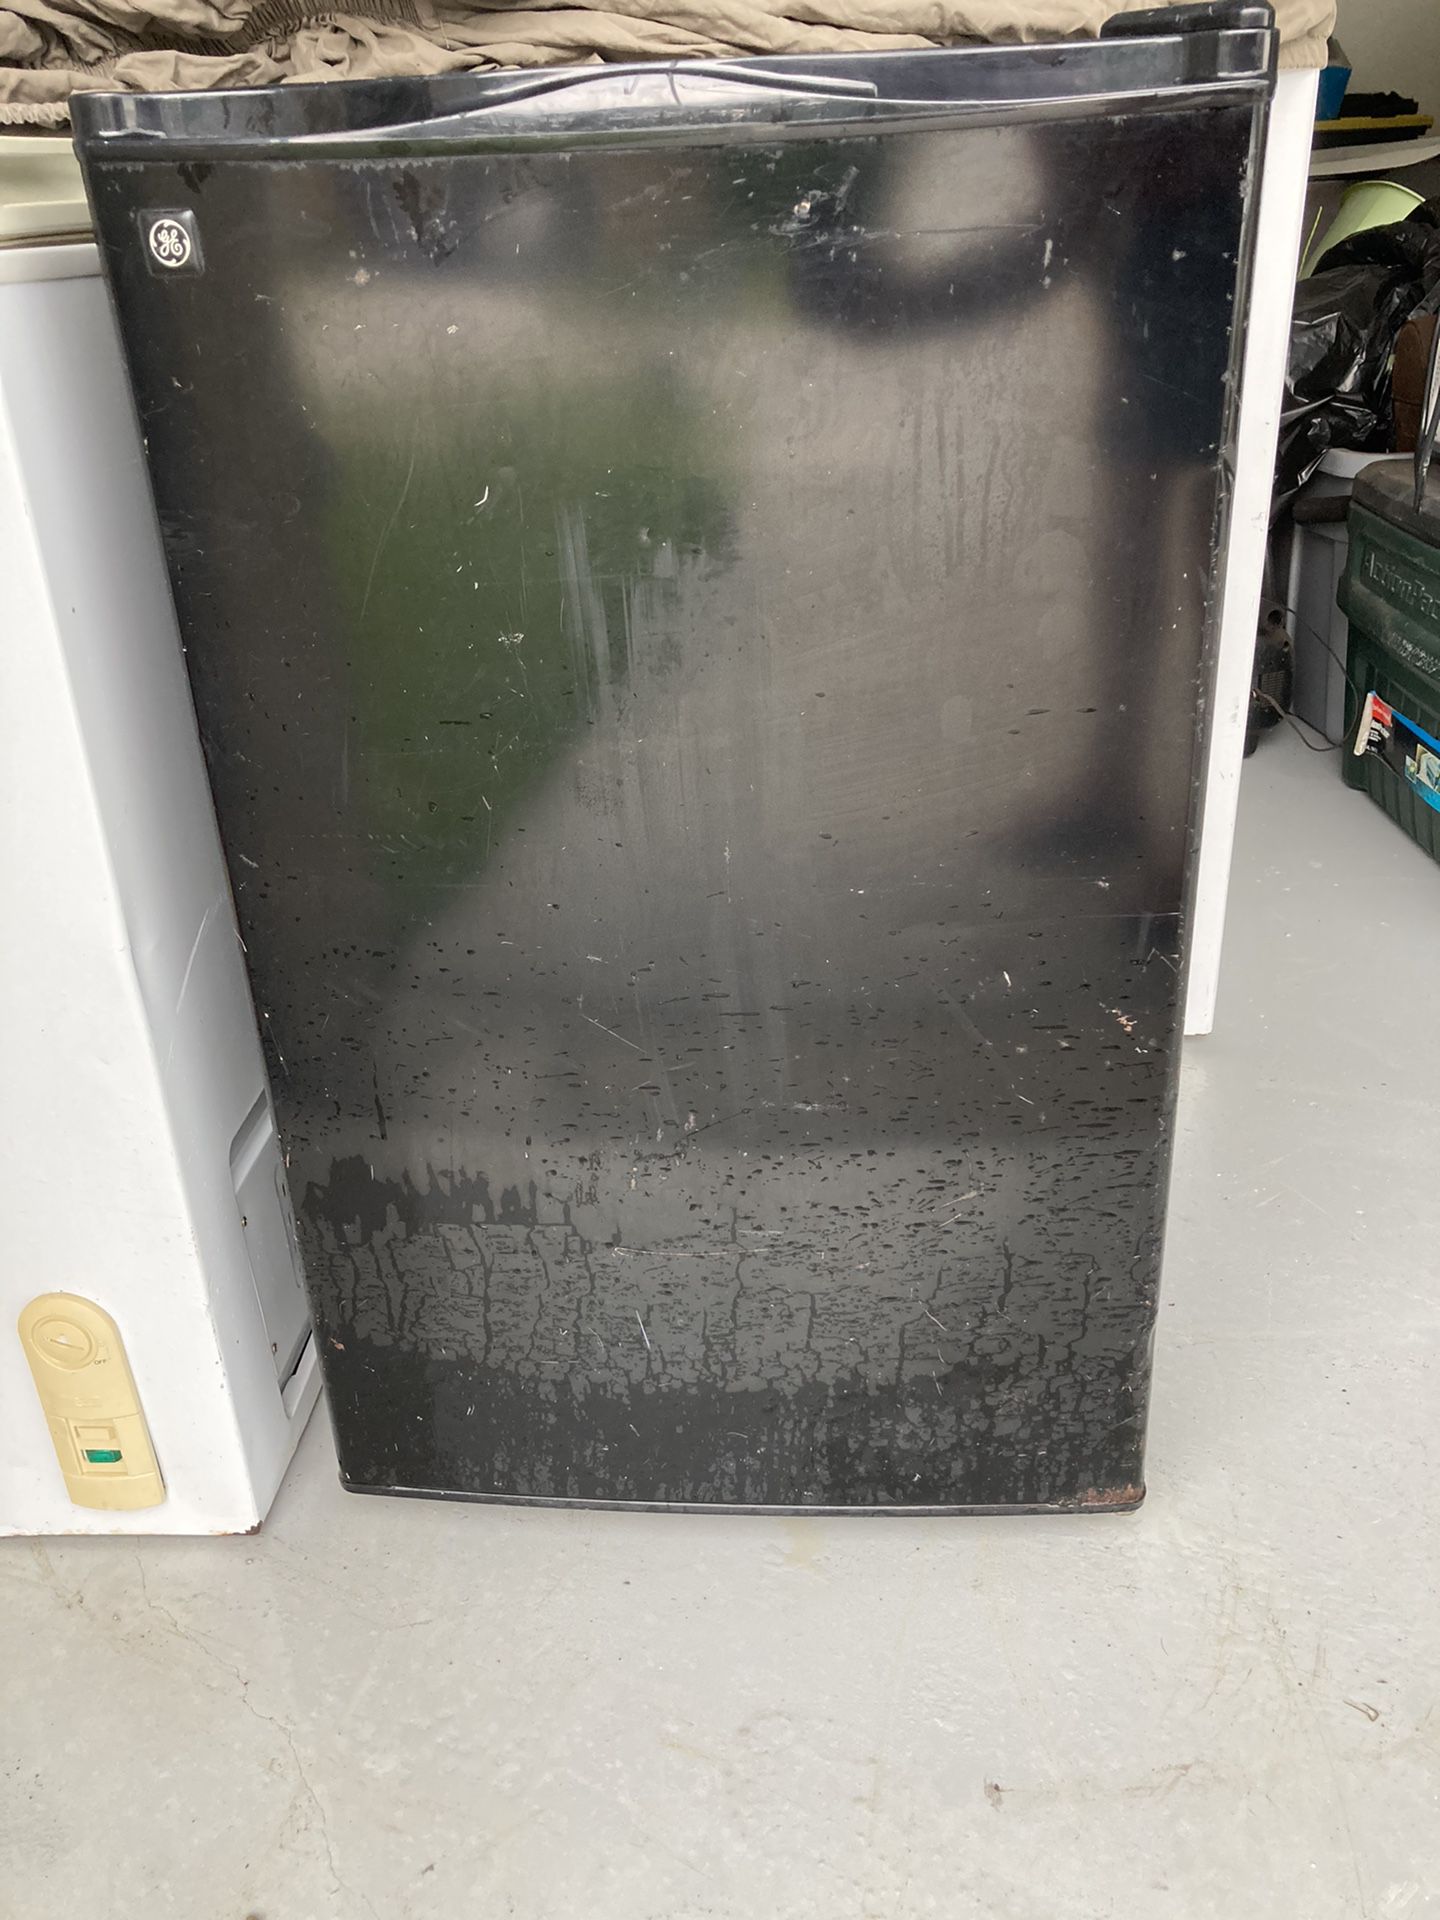 Small black refrigerator works great looks rough